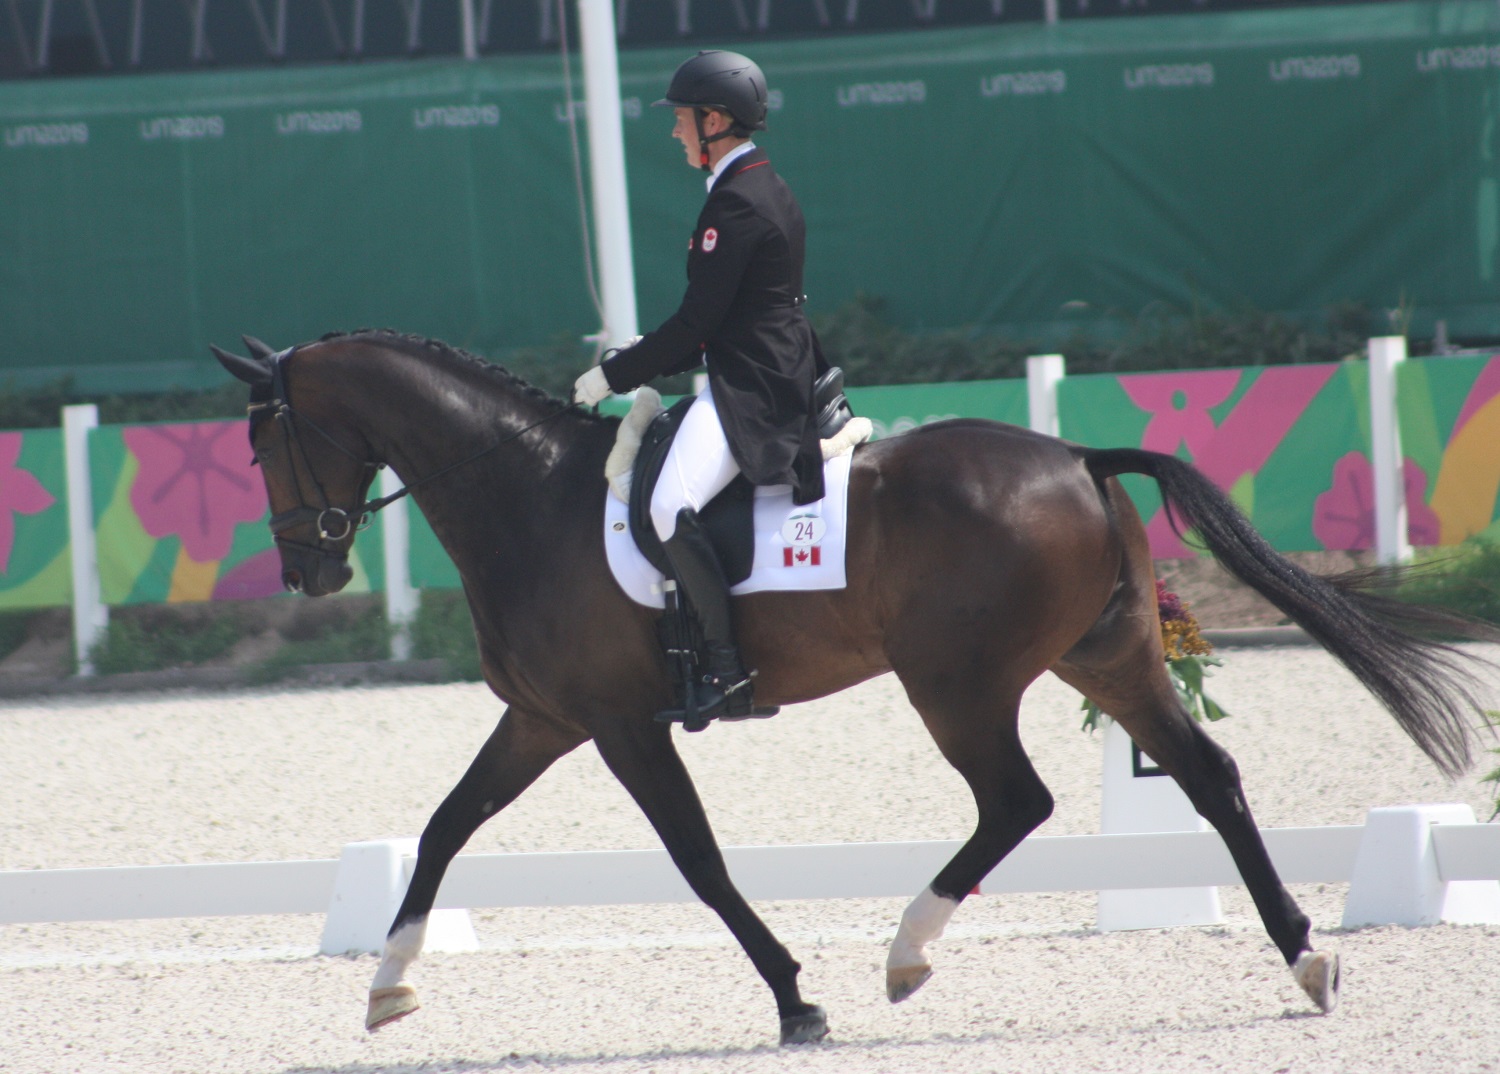 Thumbnail for Eventing Dressage: Canada Well-Positioned for Cross-Country Day at Pan Am Games